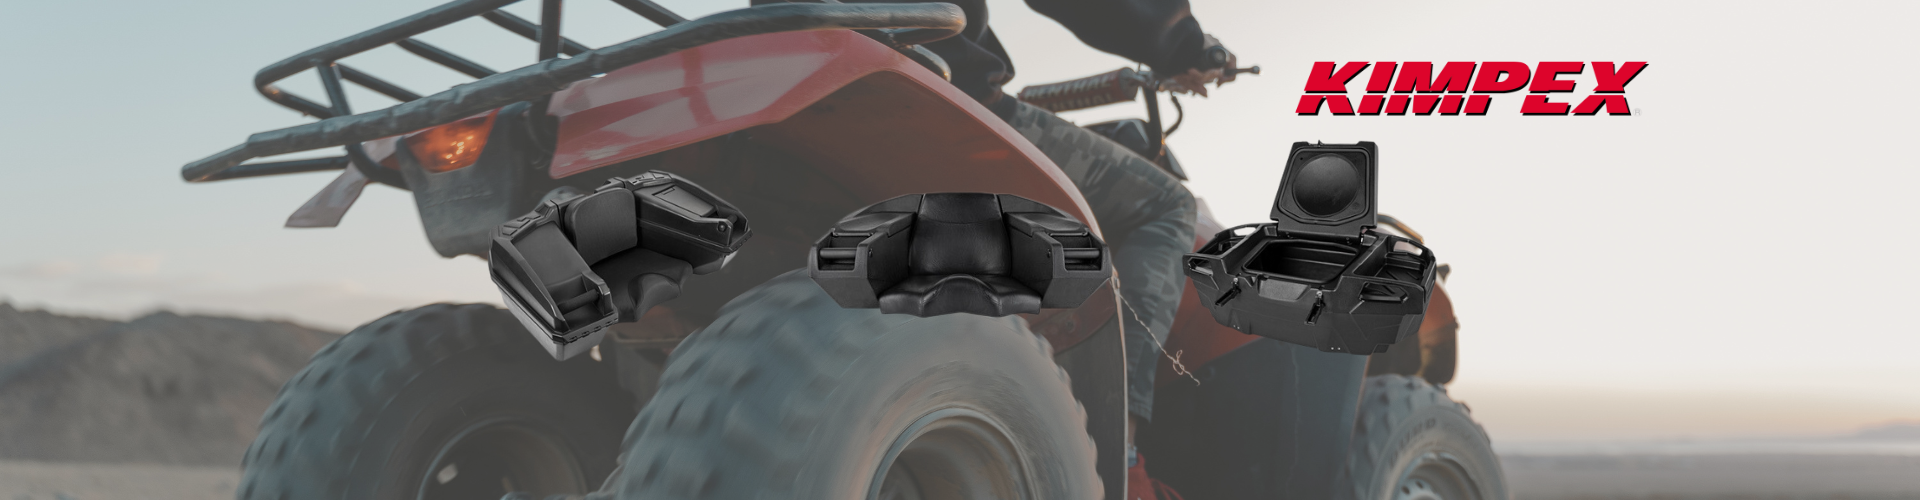 ATV background with trunk box with Kimpex logo